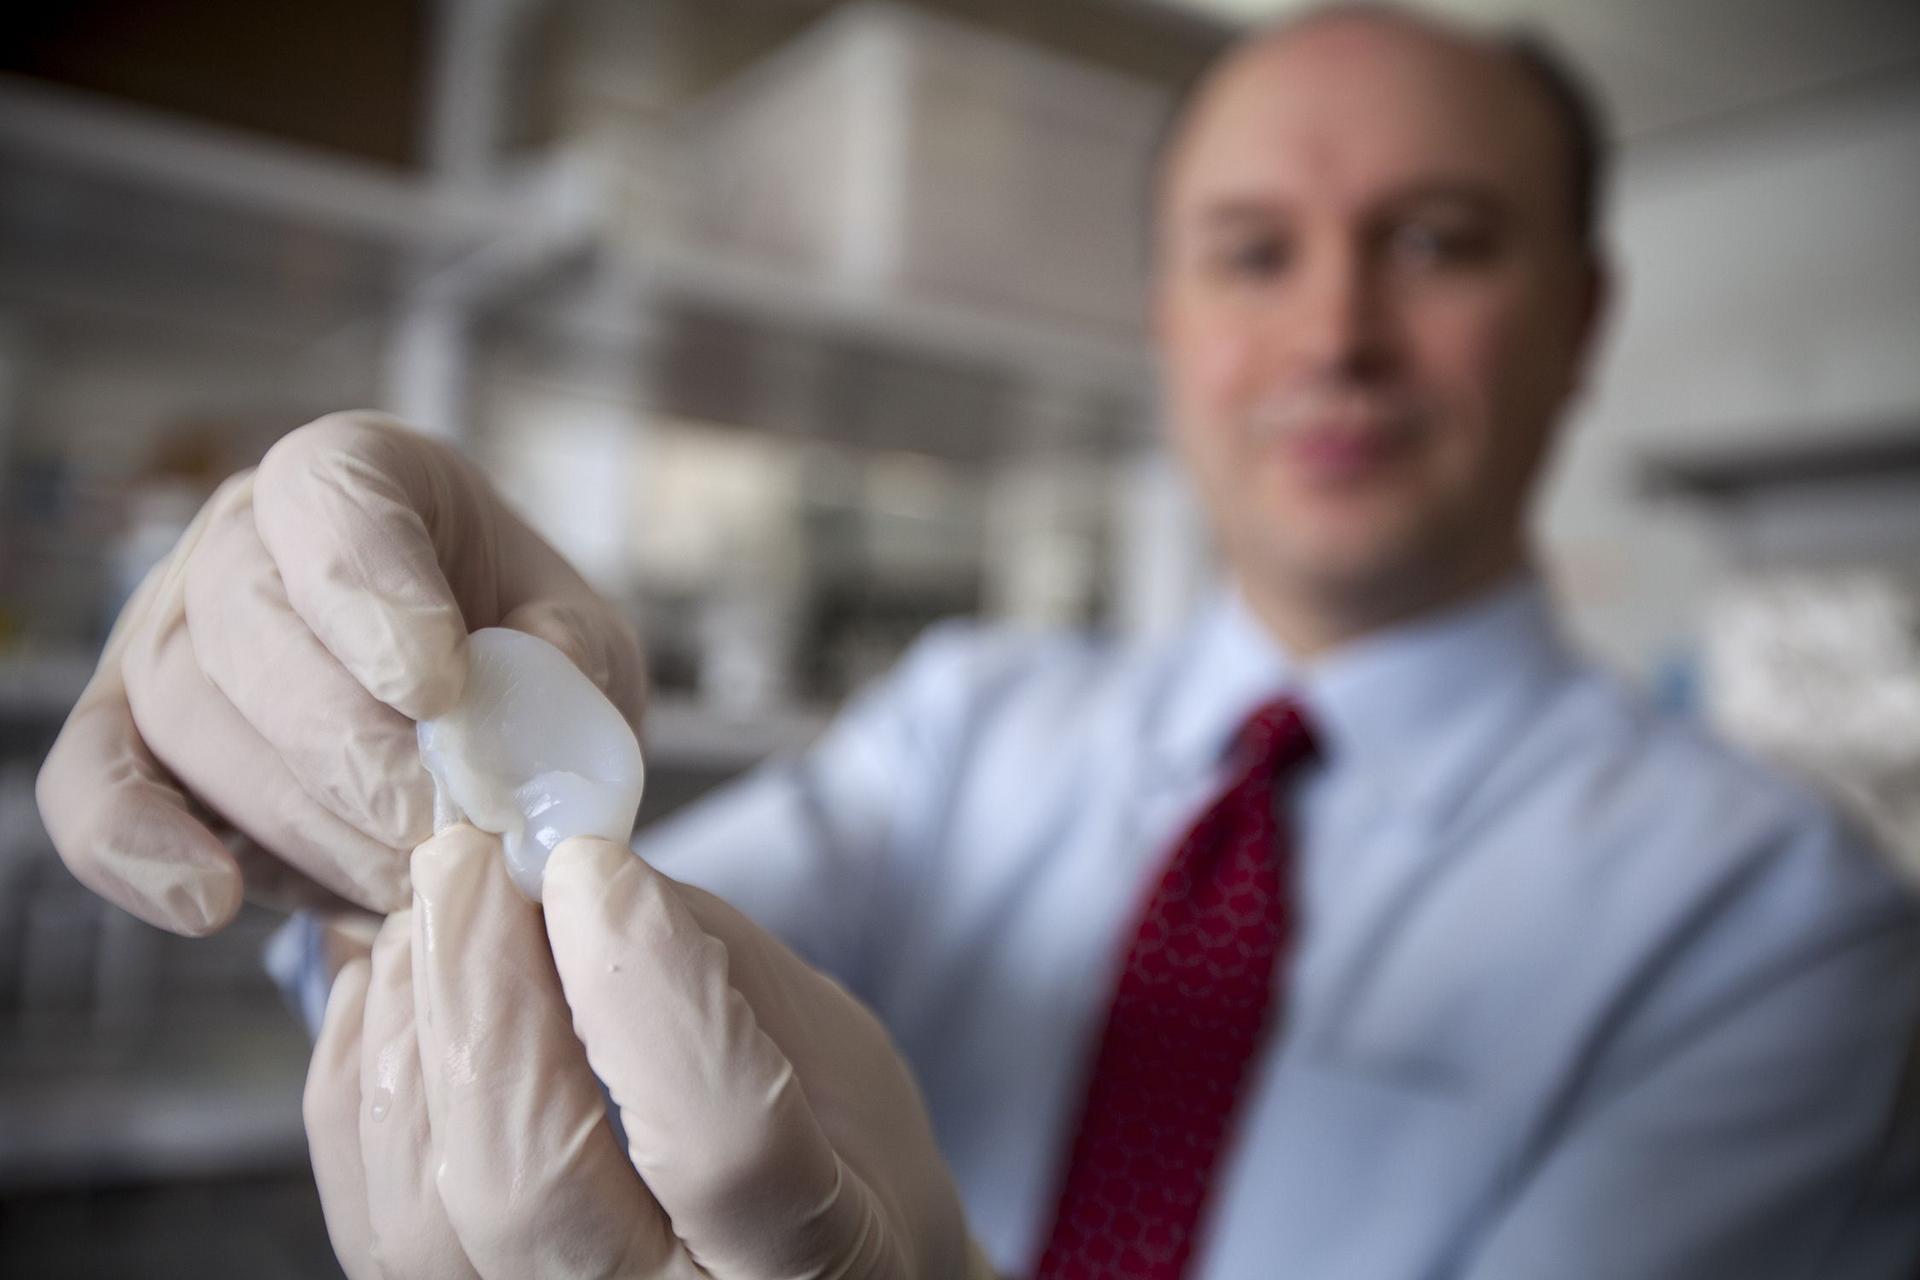 Lawrence Bonassar of Cornell University shows the ear made by a 3-D printer. Photo: AFP